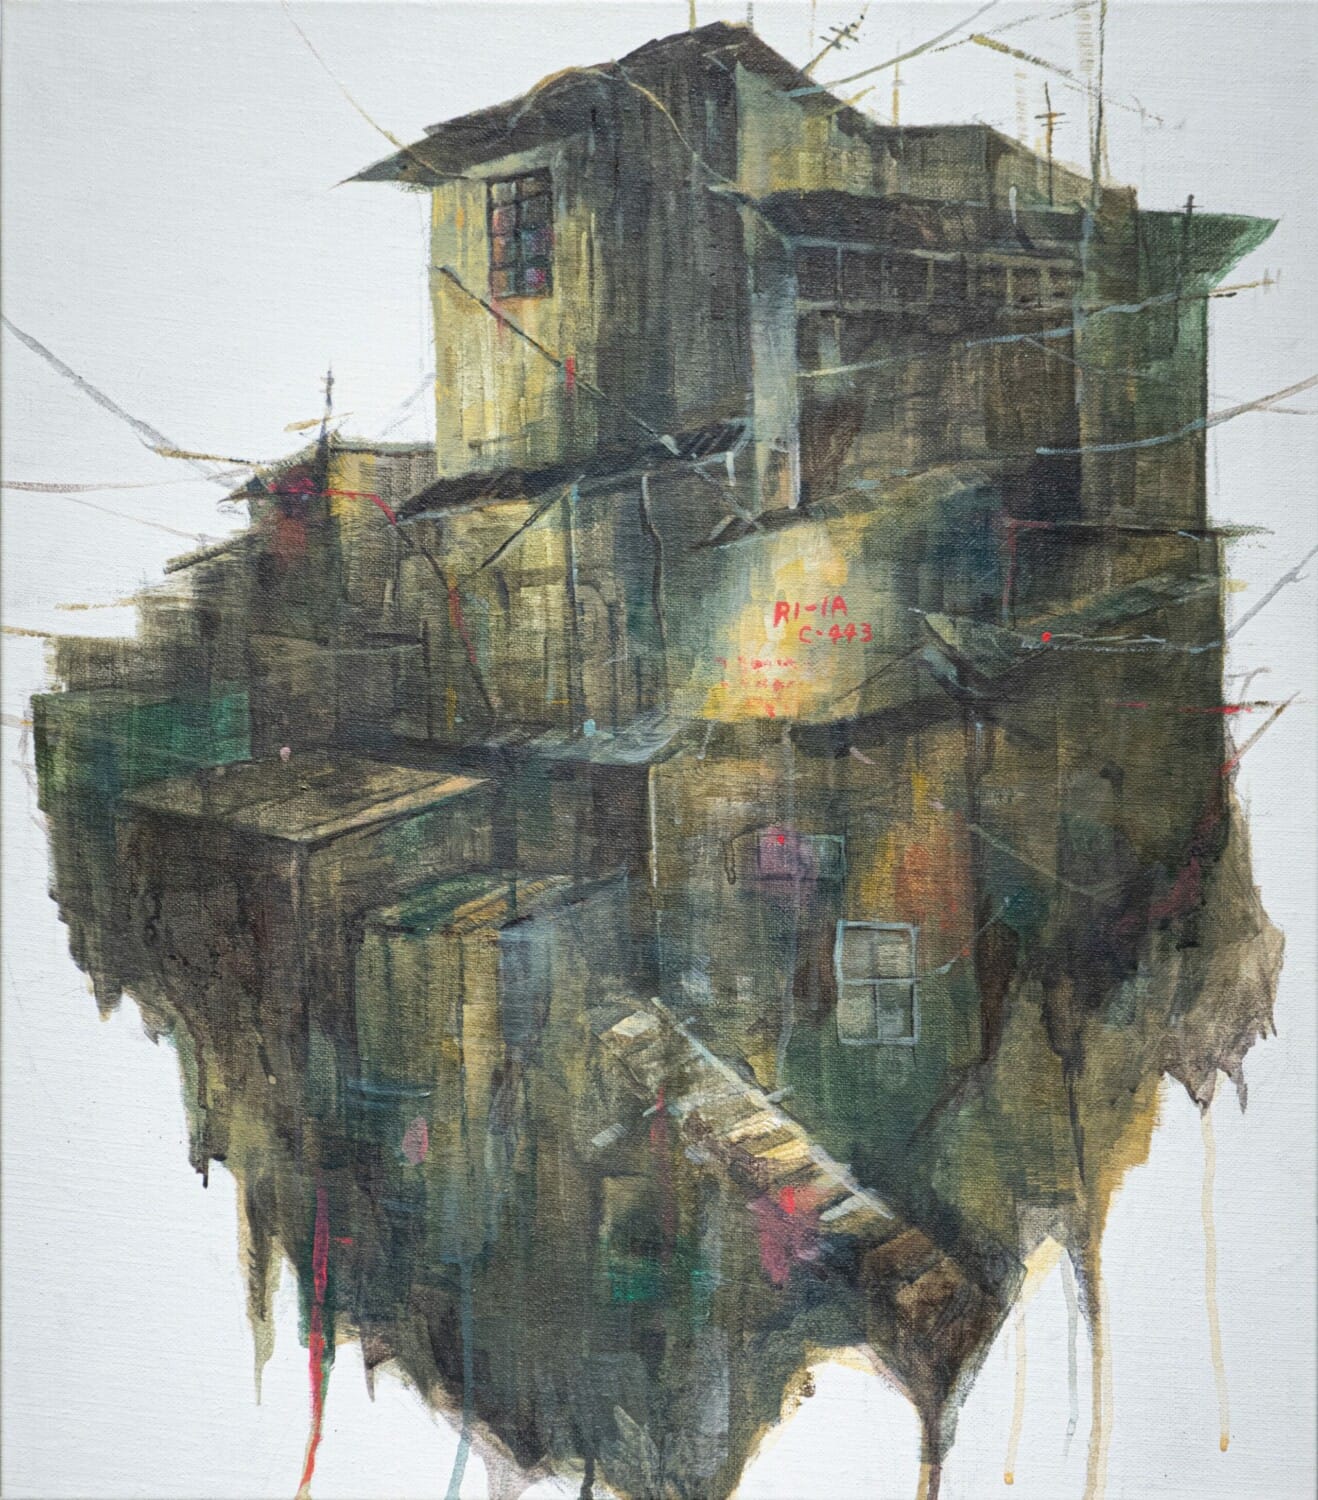 Elaine Chiu, Cha Kwo Ling Village ????, 2021, Acrylic on canvas, 61 by 53.5cm